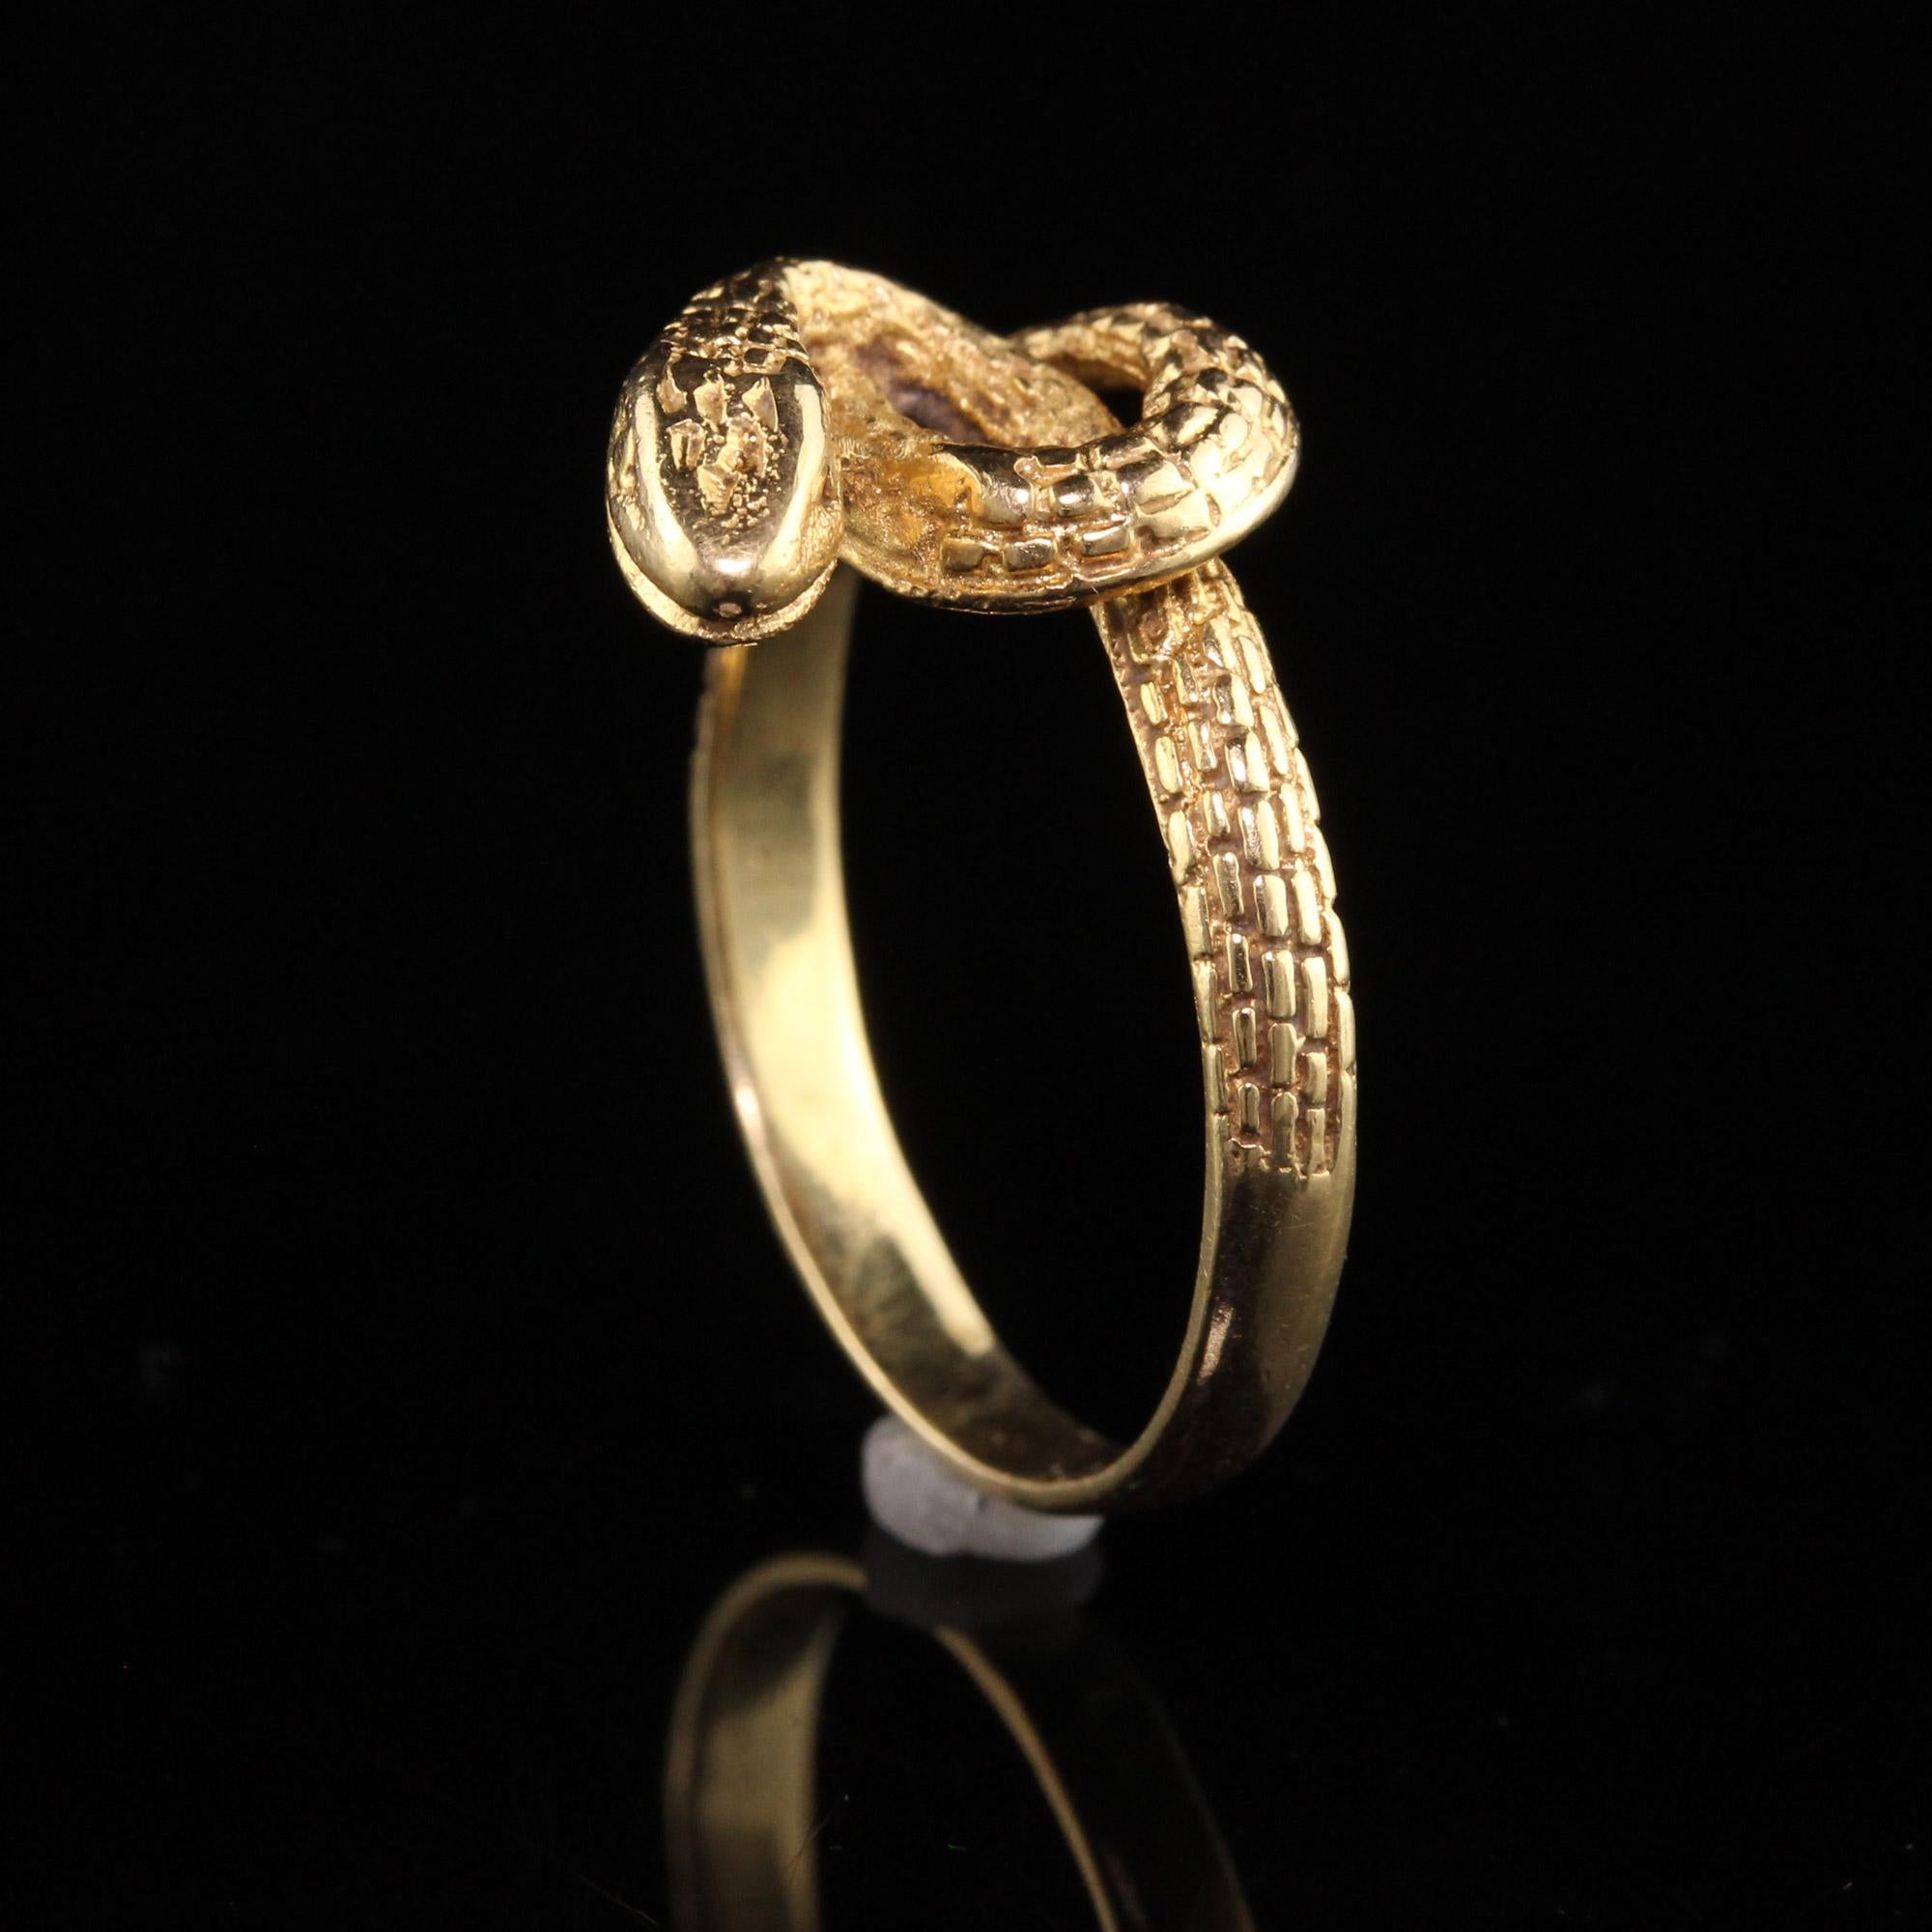 Antique Victorian 19K Yellow Gold Engraved Snake Ring 2